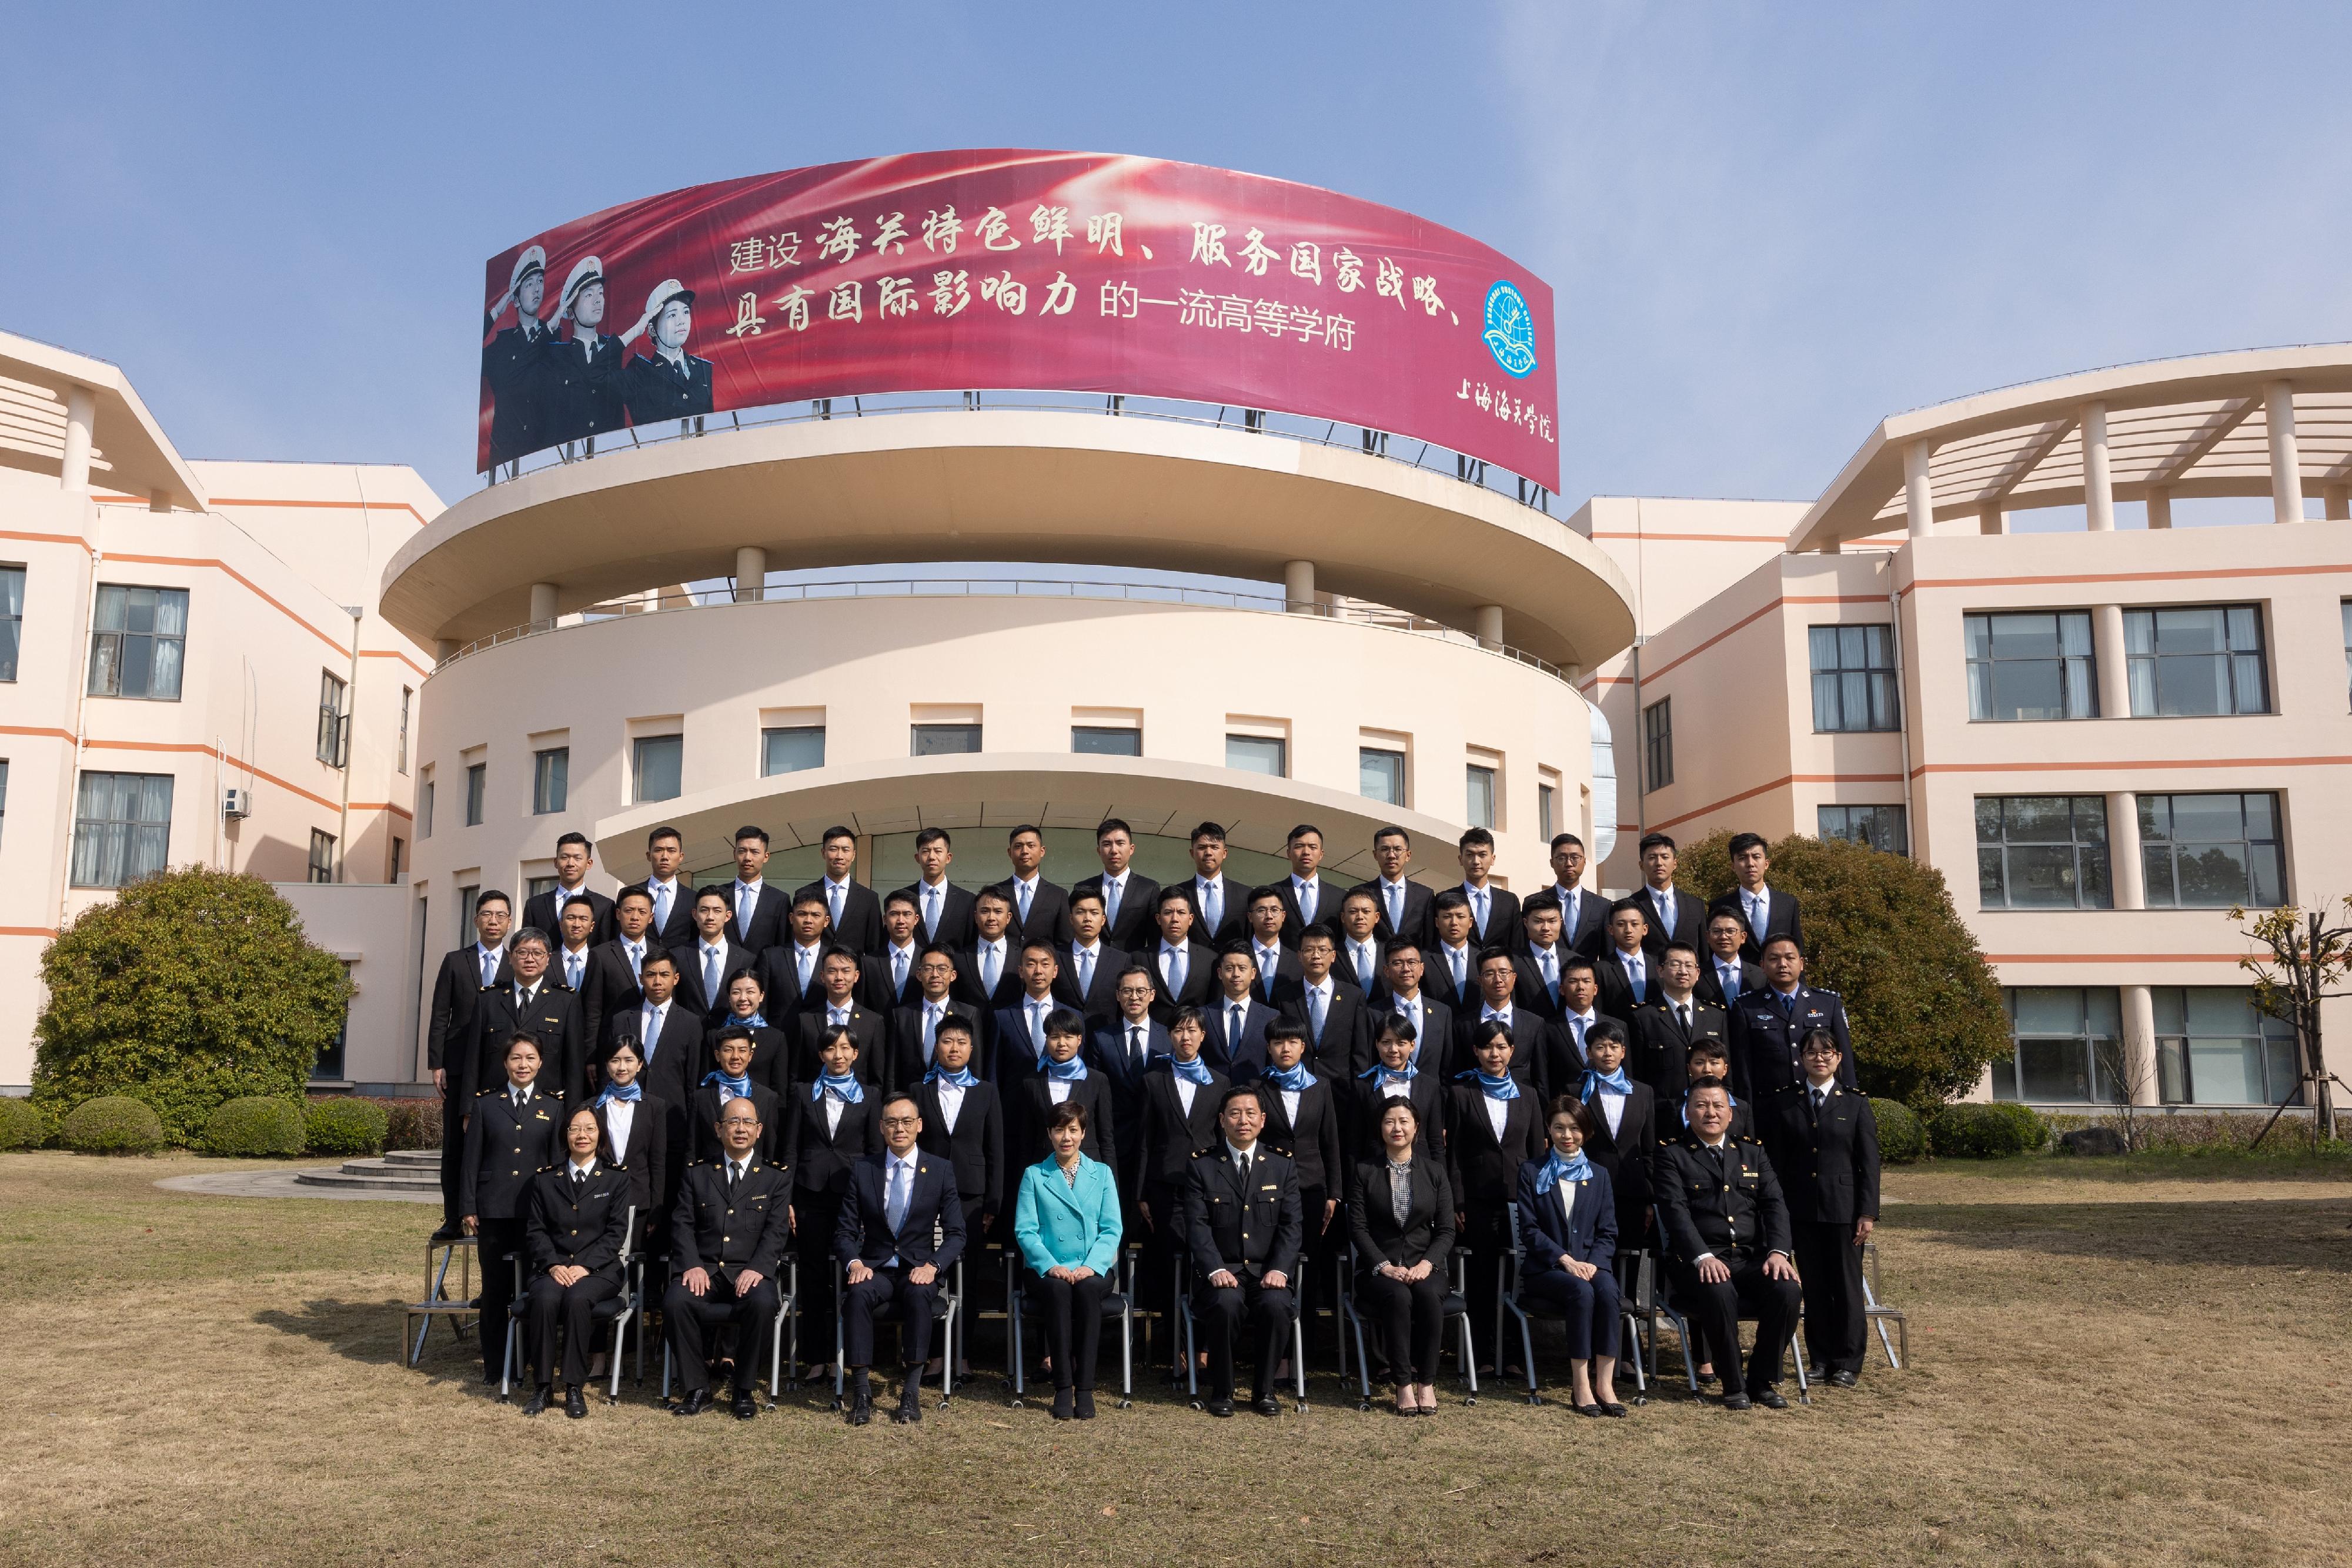 The Commissioner of Customs and Excise, Ms Louise Ho, started her visit to Shanghai, Beijing, and the Guangdong-Hong Kong-Macao Greater Bay Area on March 26. Photo shows Ms Ho (front row, fourth left) with Inspectors after officiating at the opening ceremony of the First Inspector Induction Course: National and Mainland Customs Operations Studies held at the Shanghai Customs College yesterday morning (March 27).